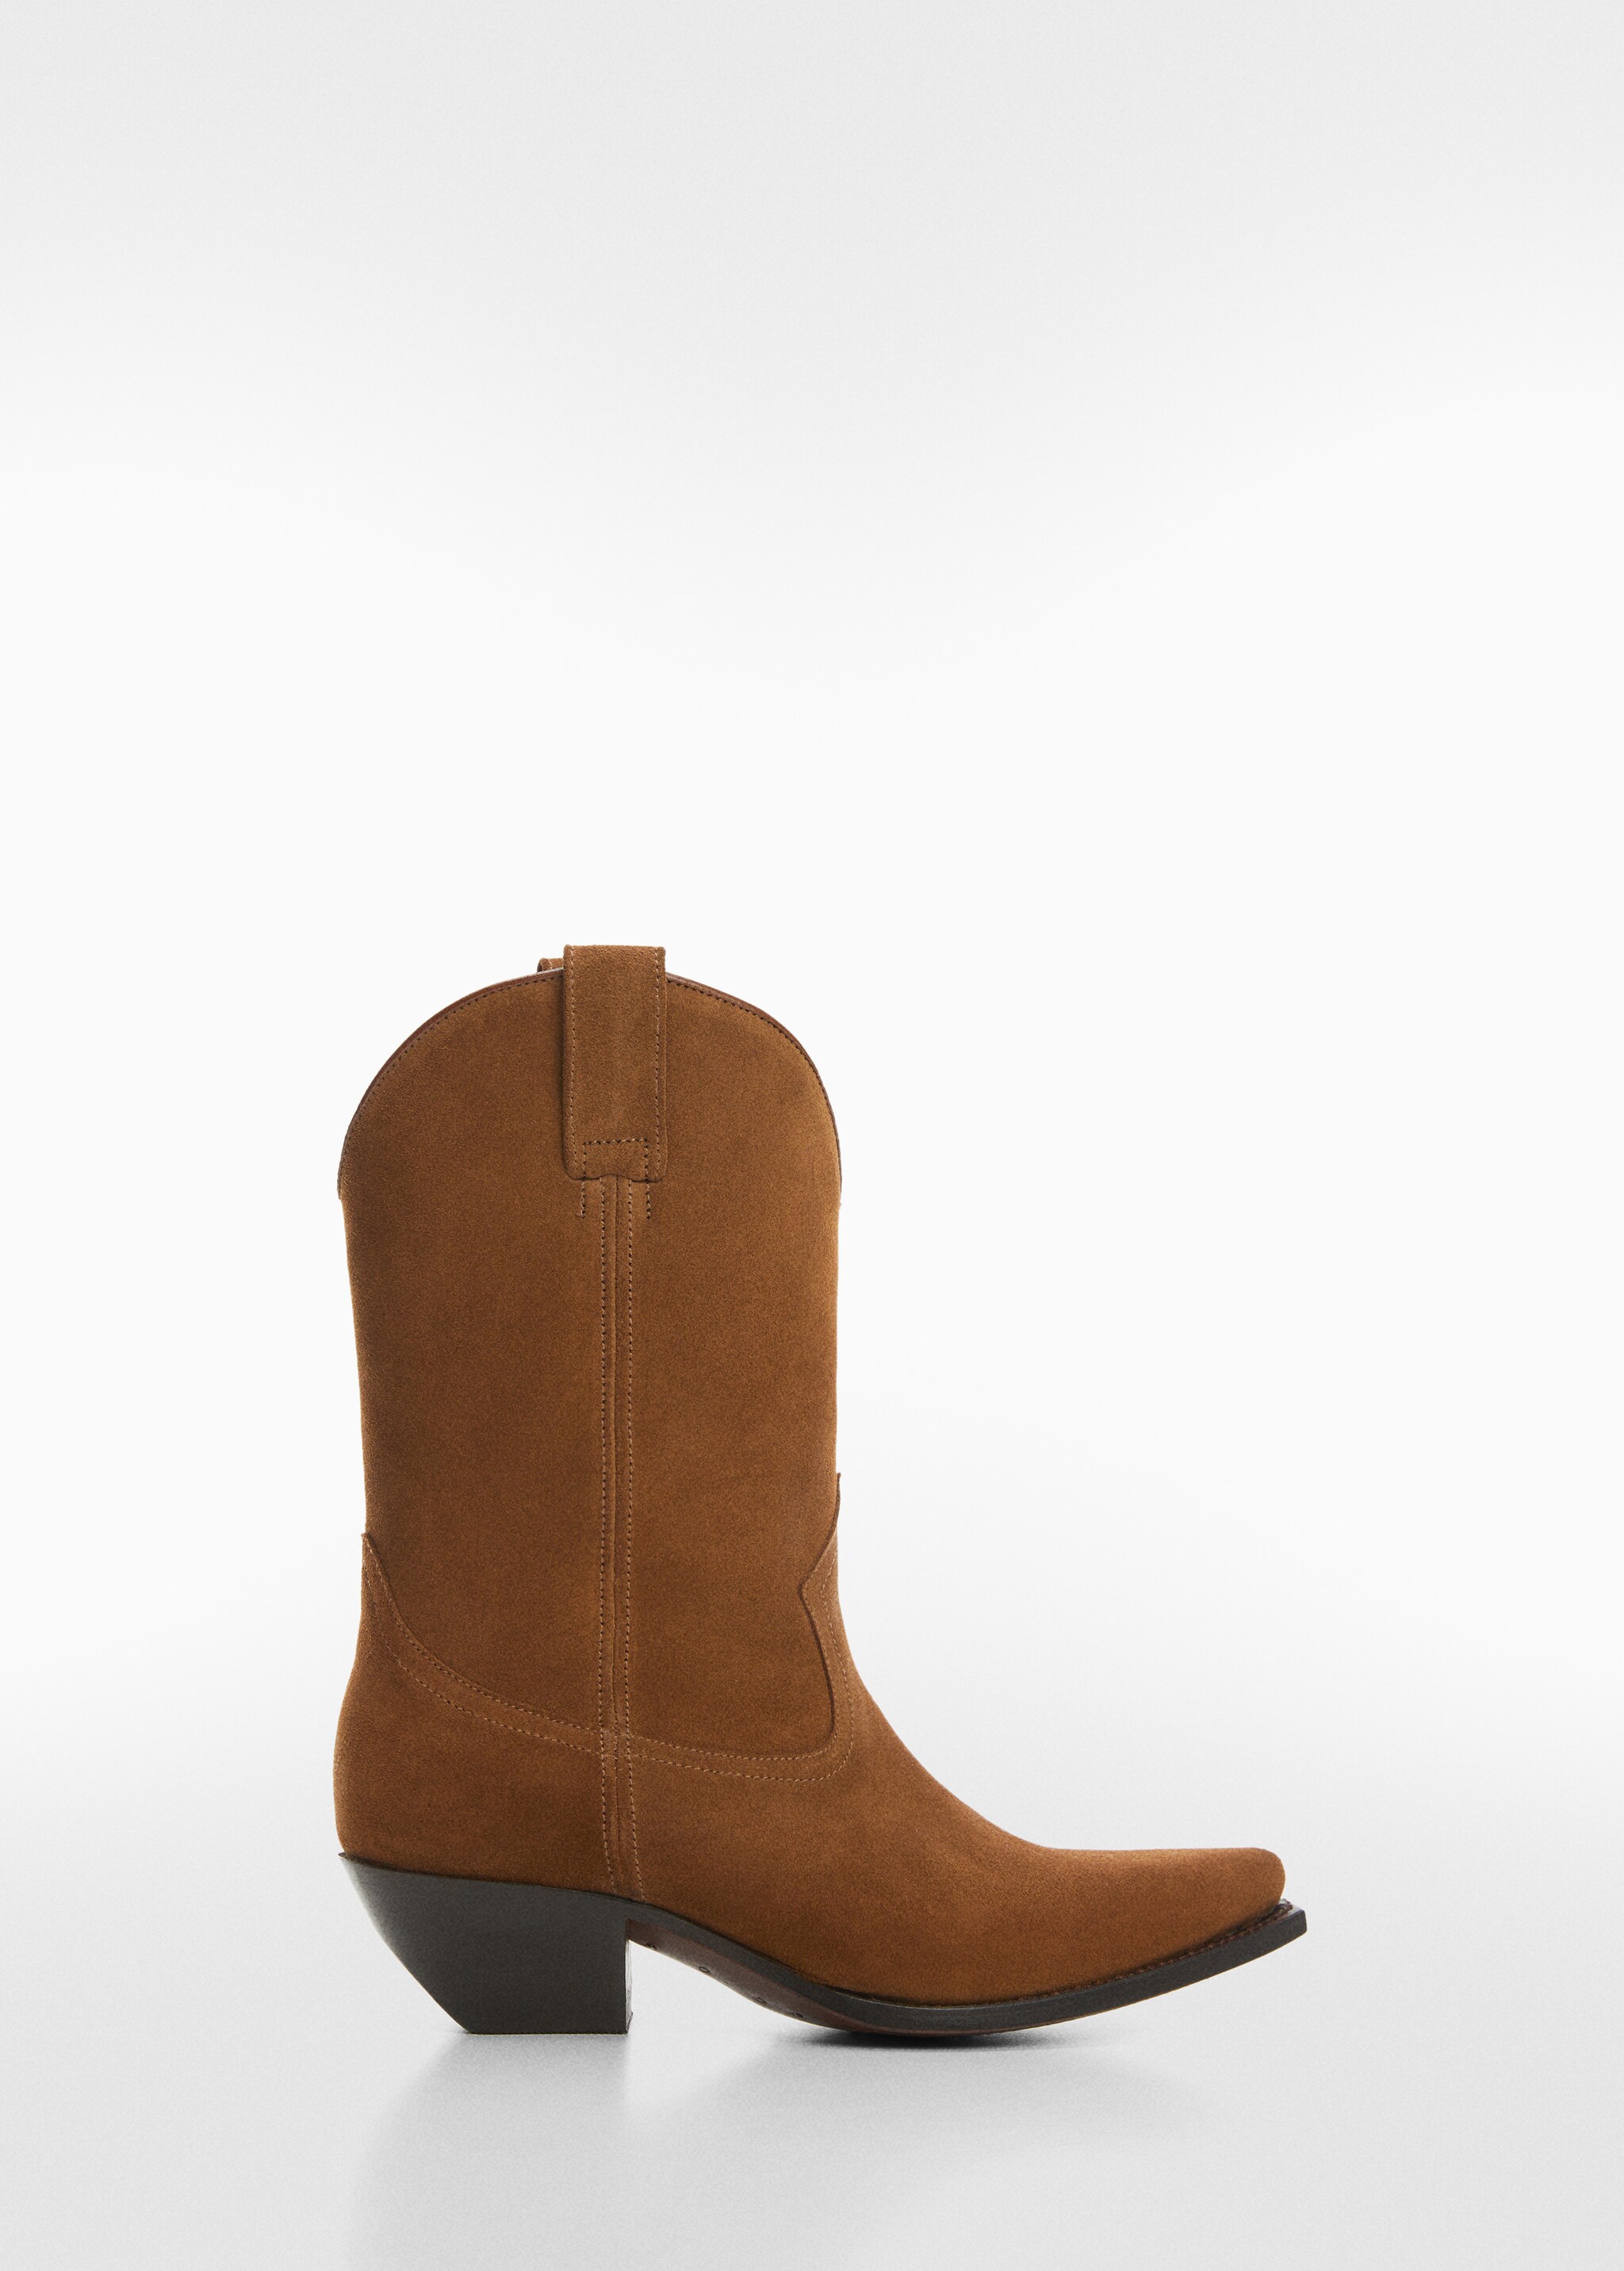 Suede cowboy ankle boots - Article without model